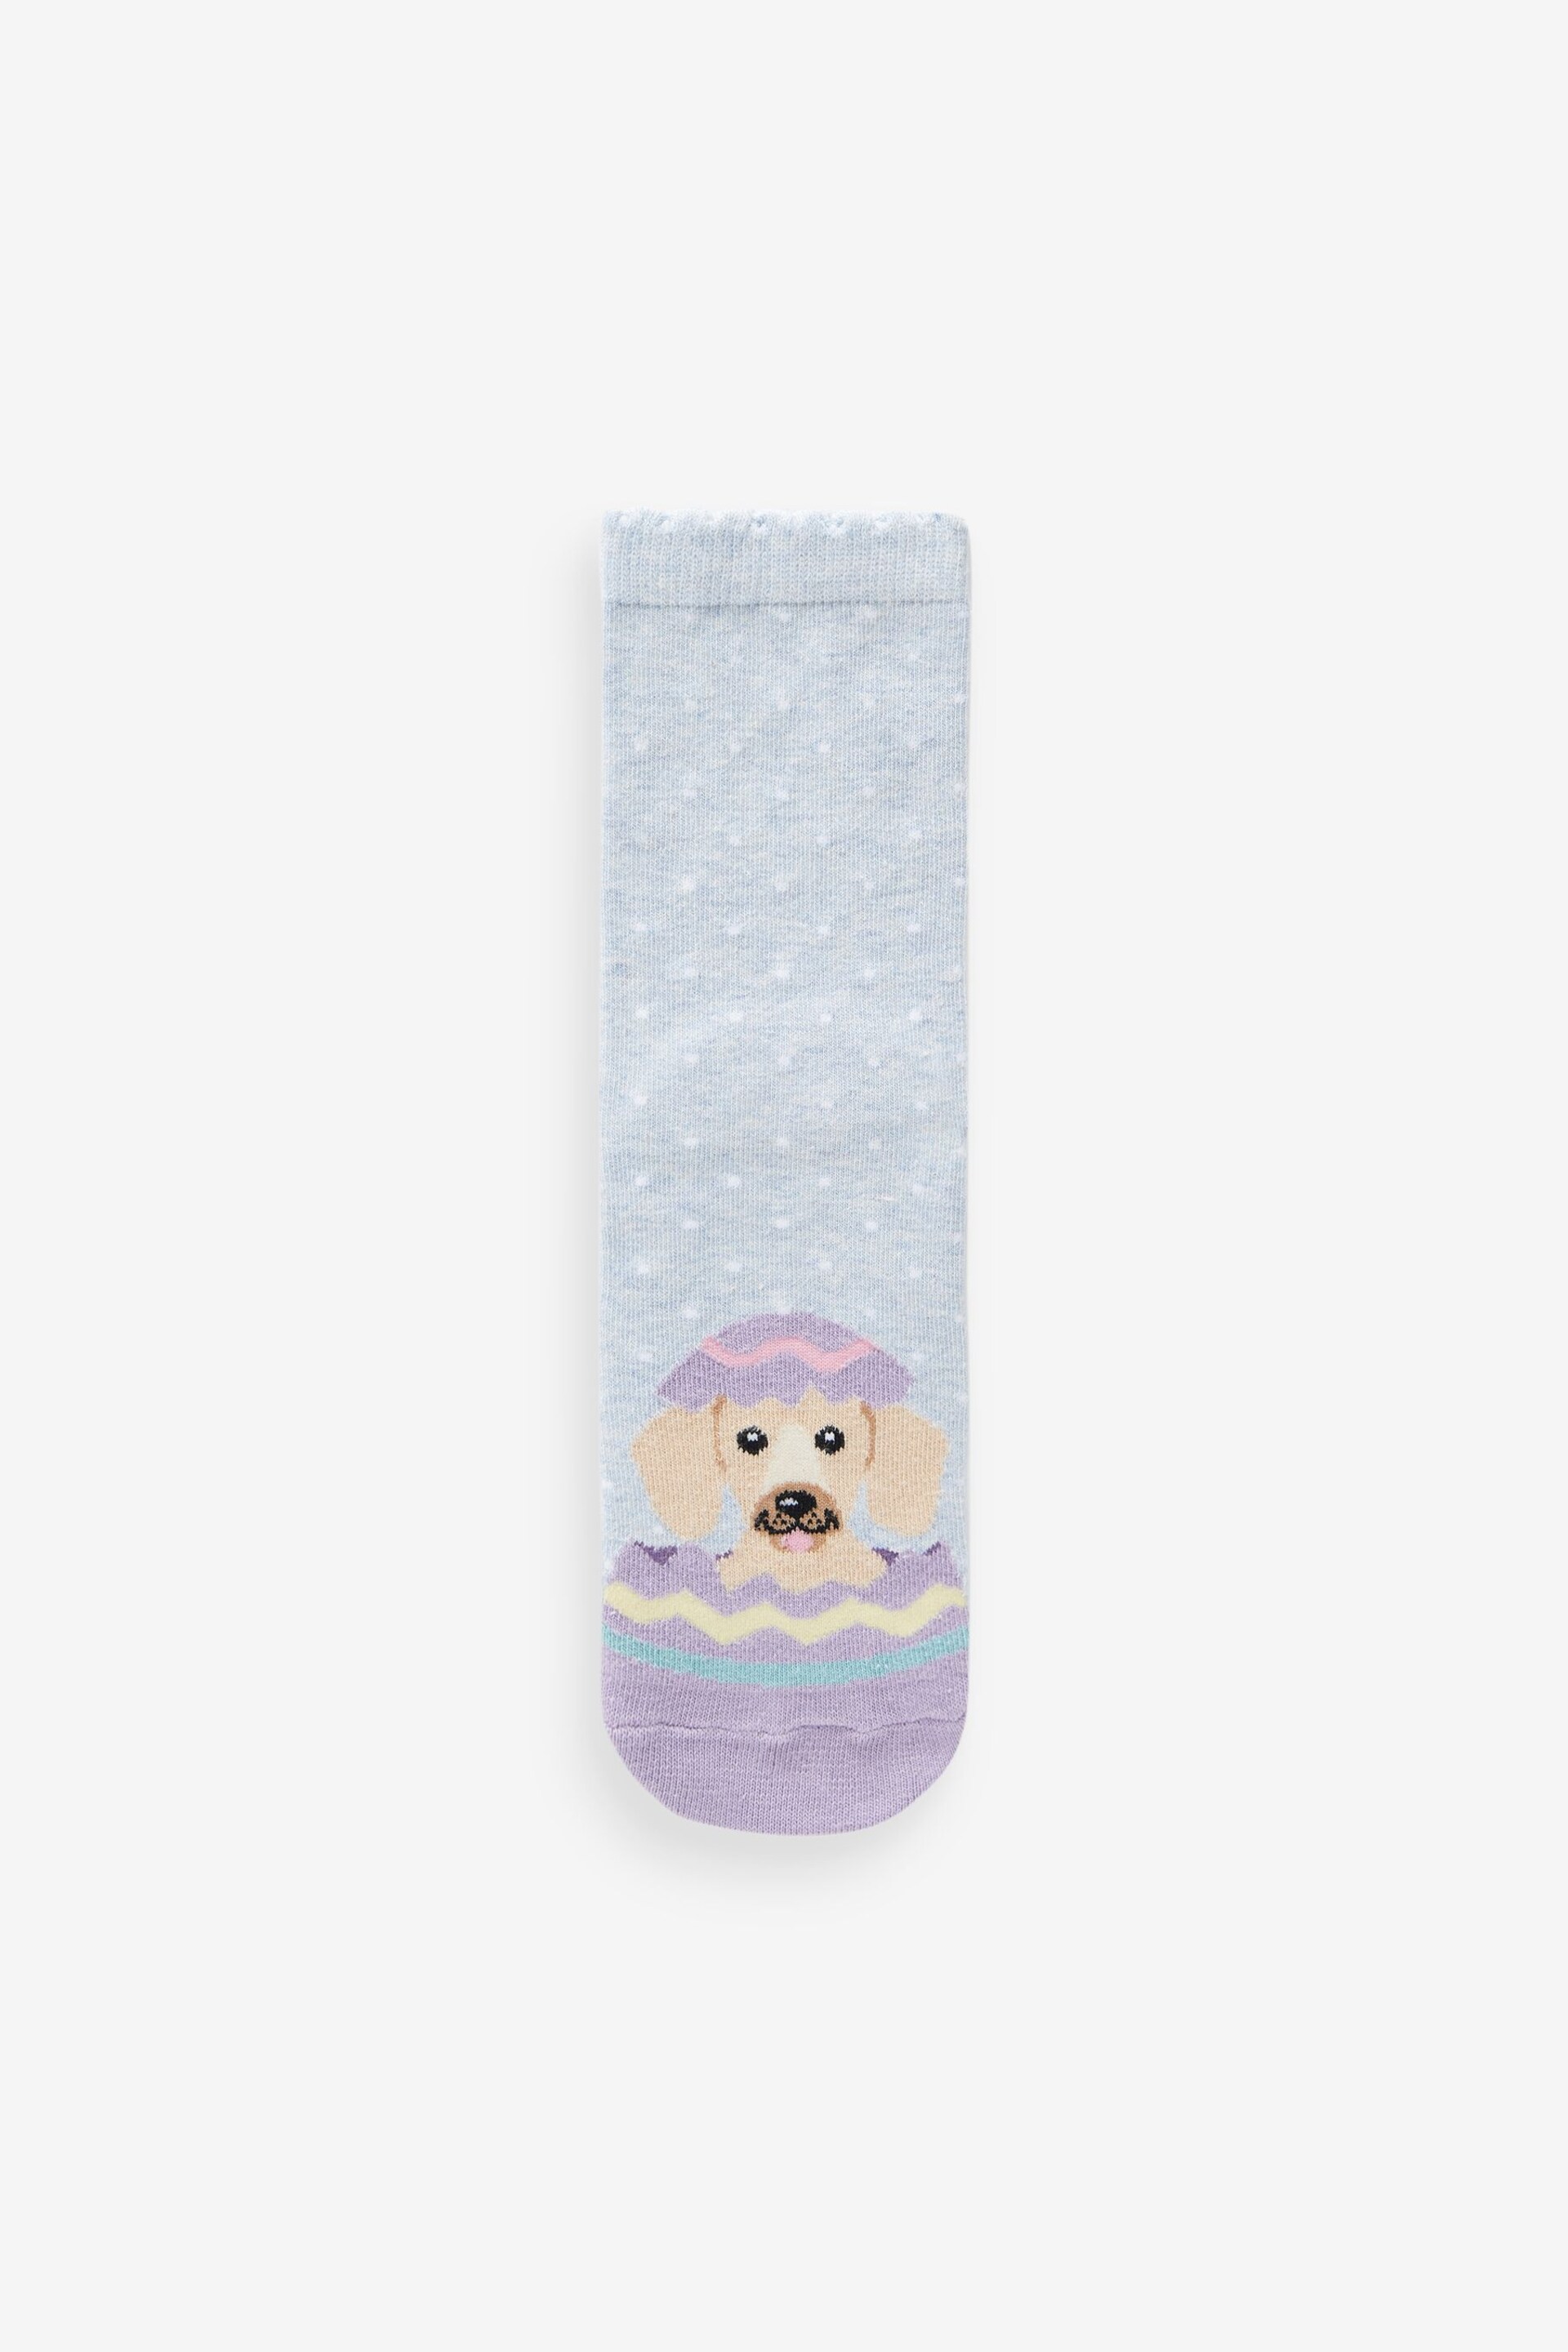 Easter Dogs Ankle Socks 4 Pack - Image 5 of 5